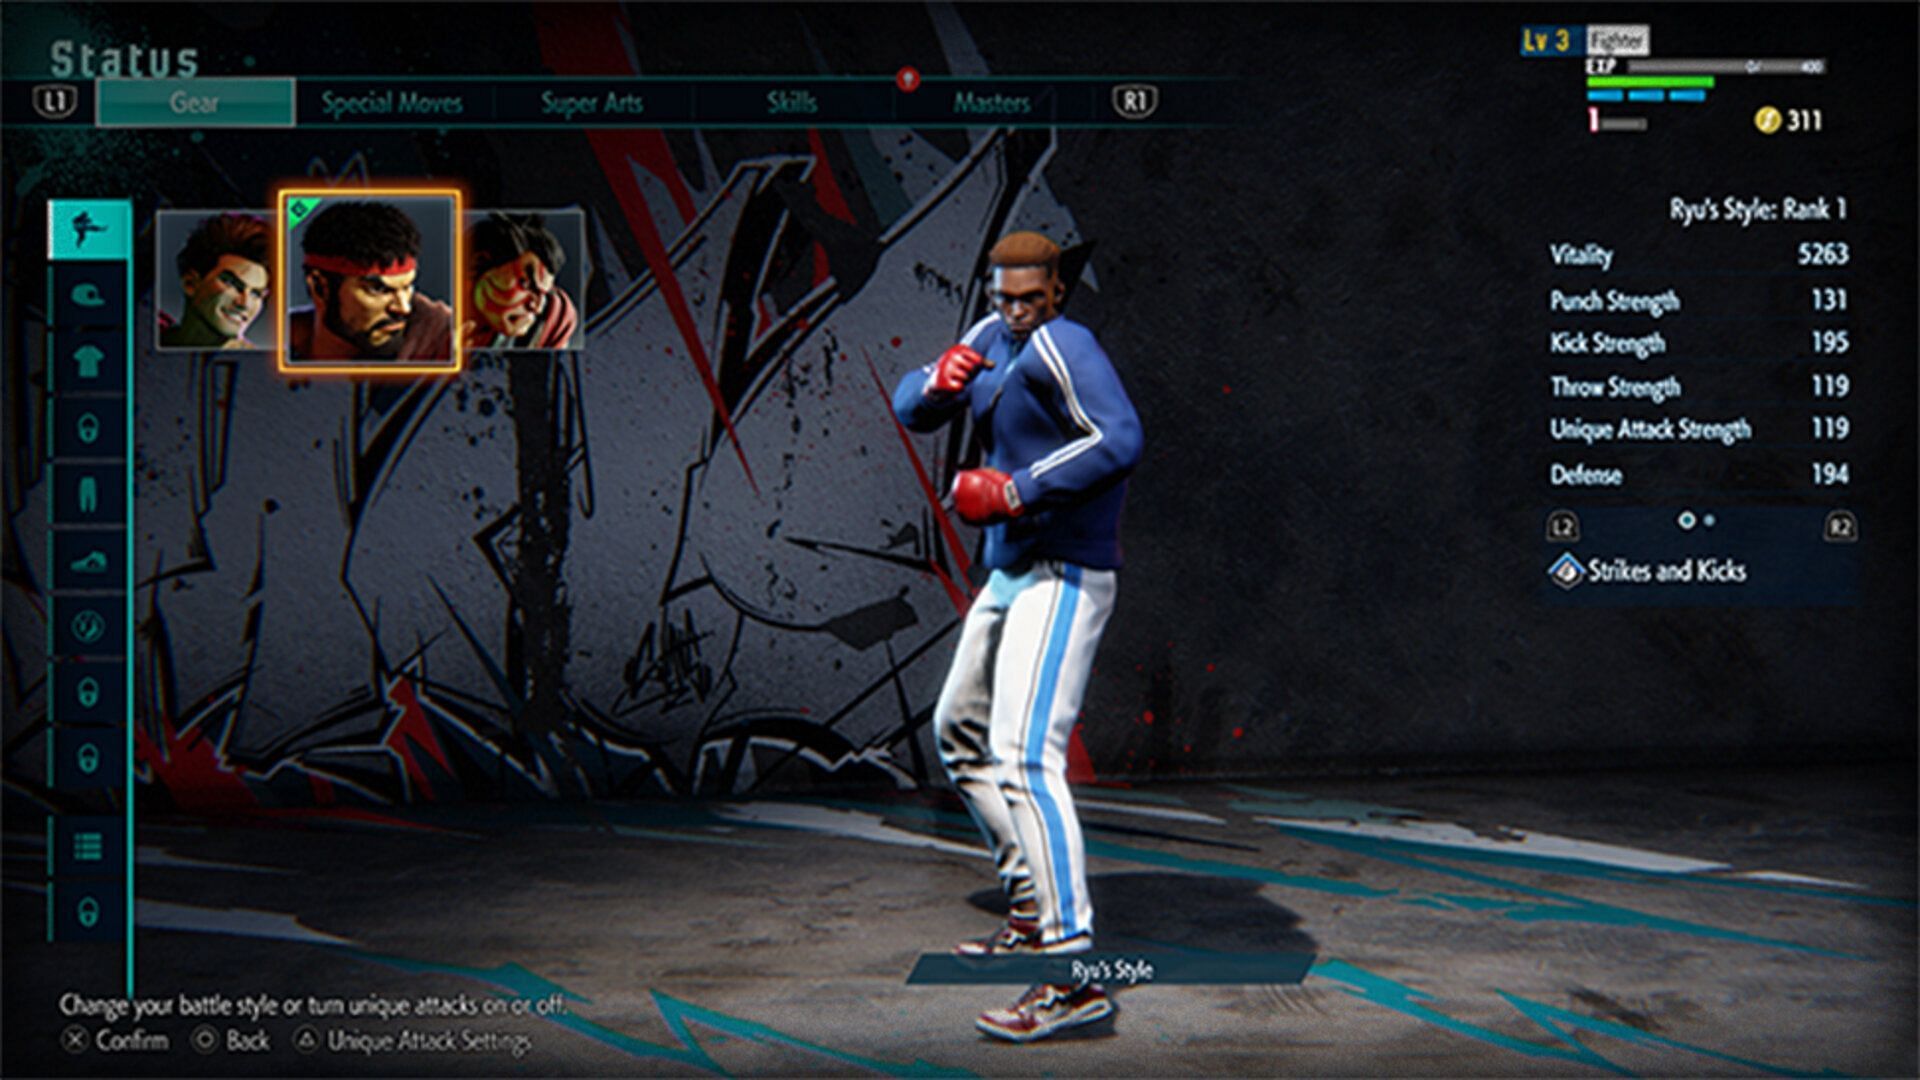 Avatar while being customized in World Tour mode (Image via Capcom)